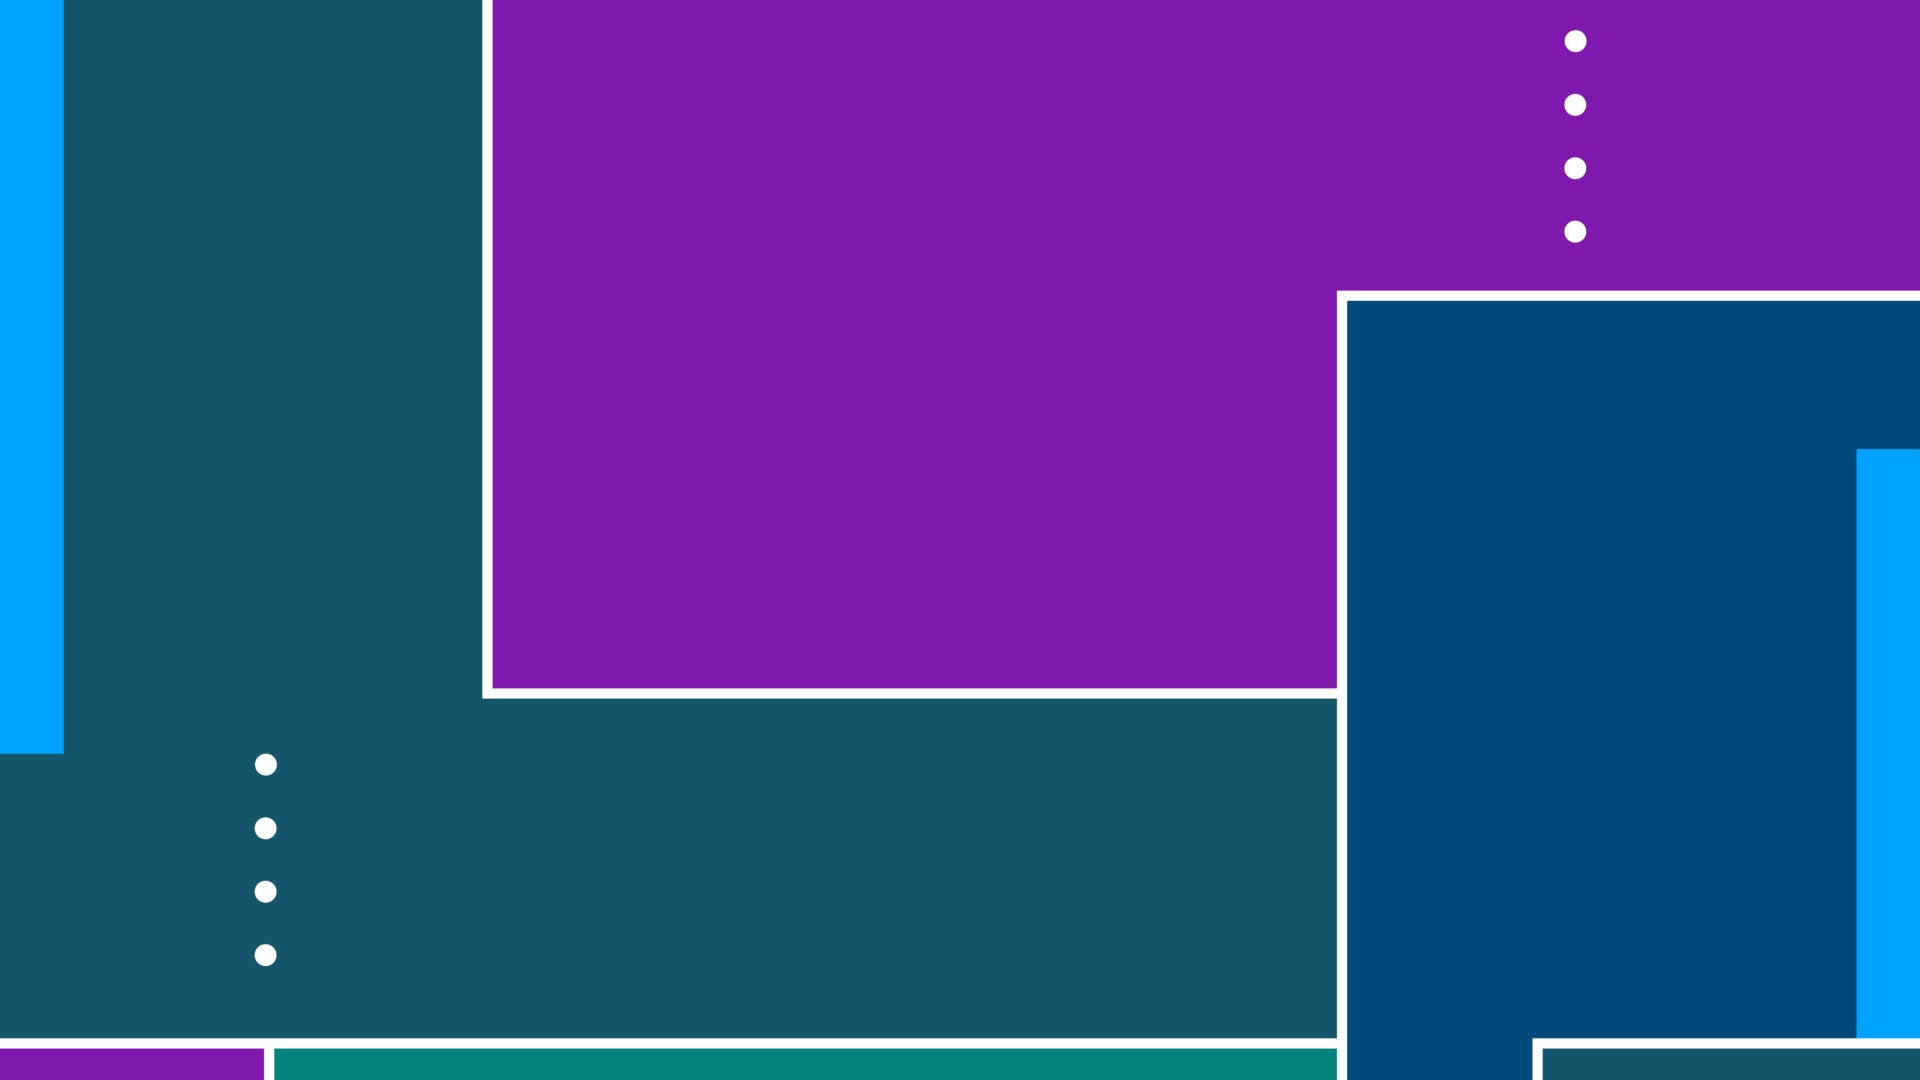 A geometric pattern of overlapping squares in shades of blue, purple, and teal.